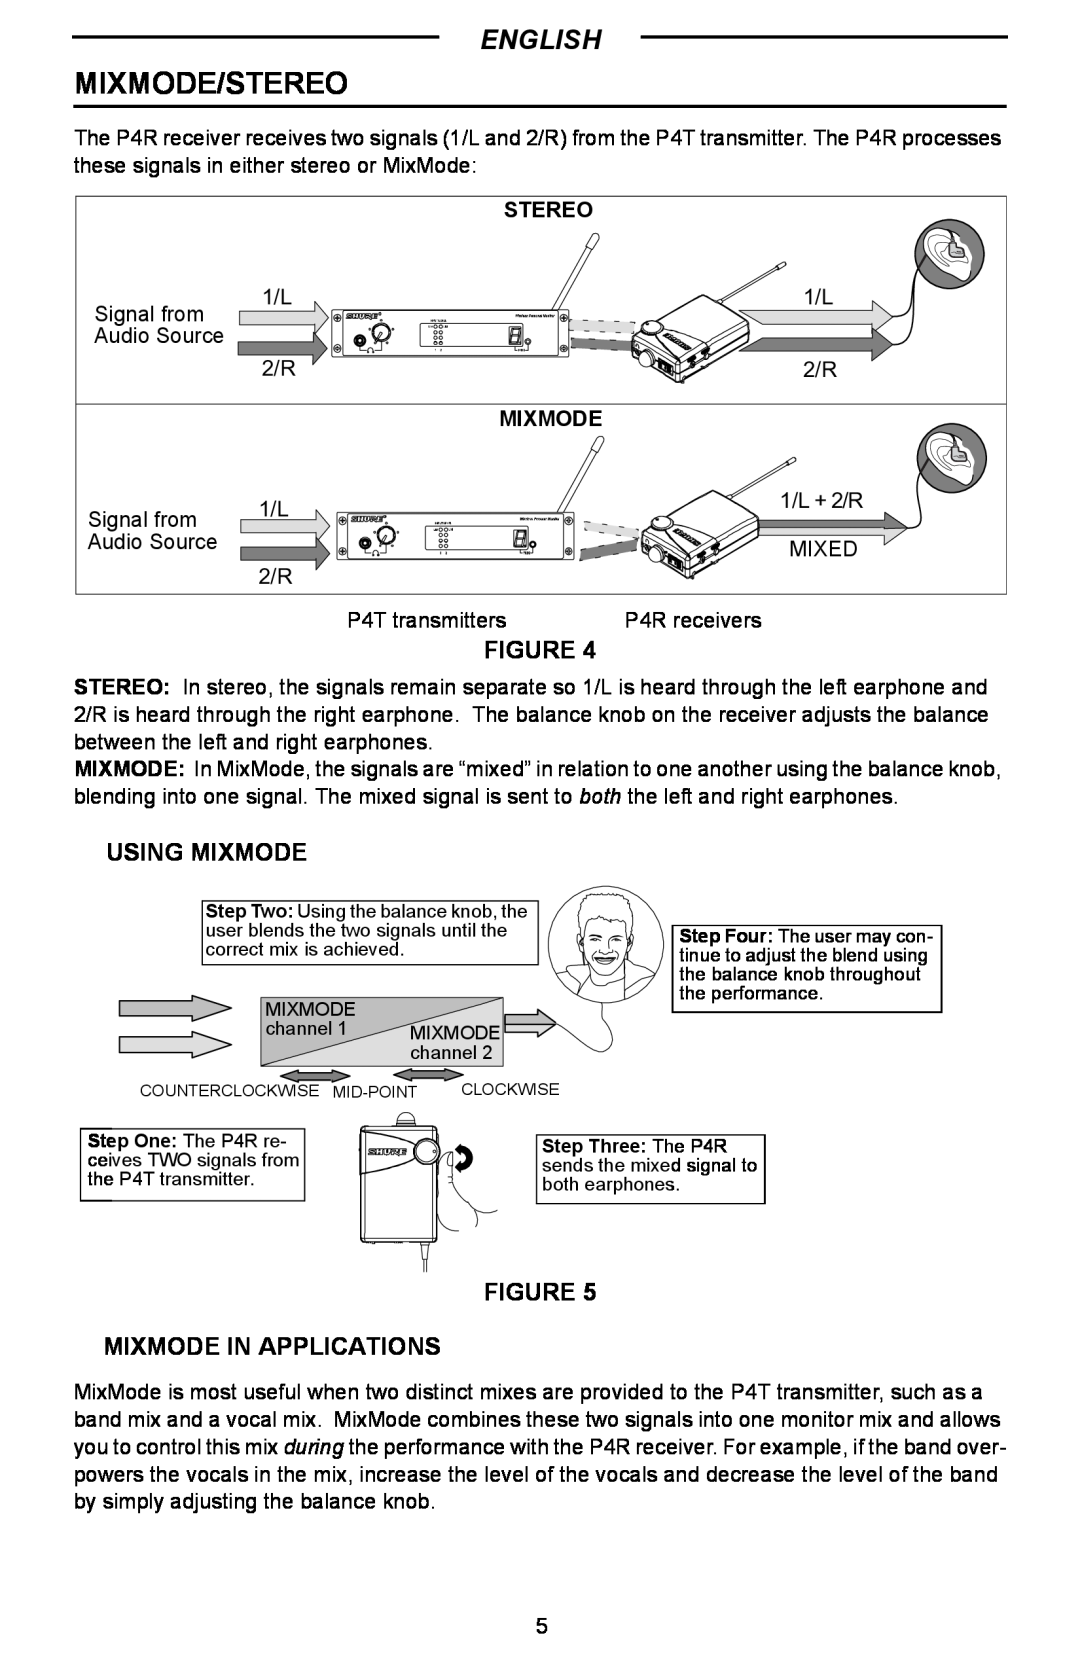 Shure P4R manual Mixmode/Stereo, English, Using Mixmode, Figure Mixmode In Applications 